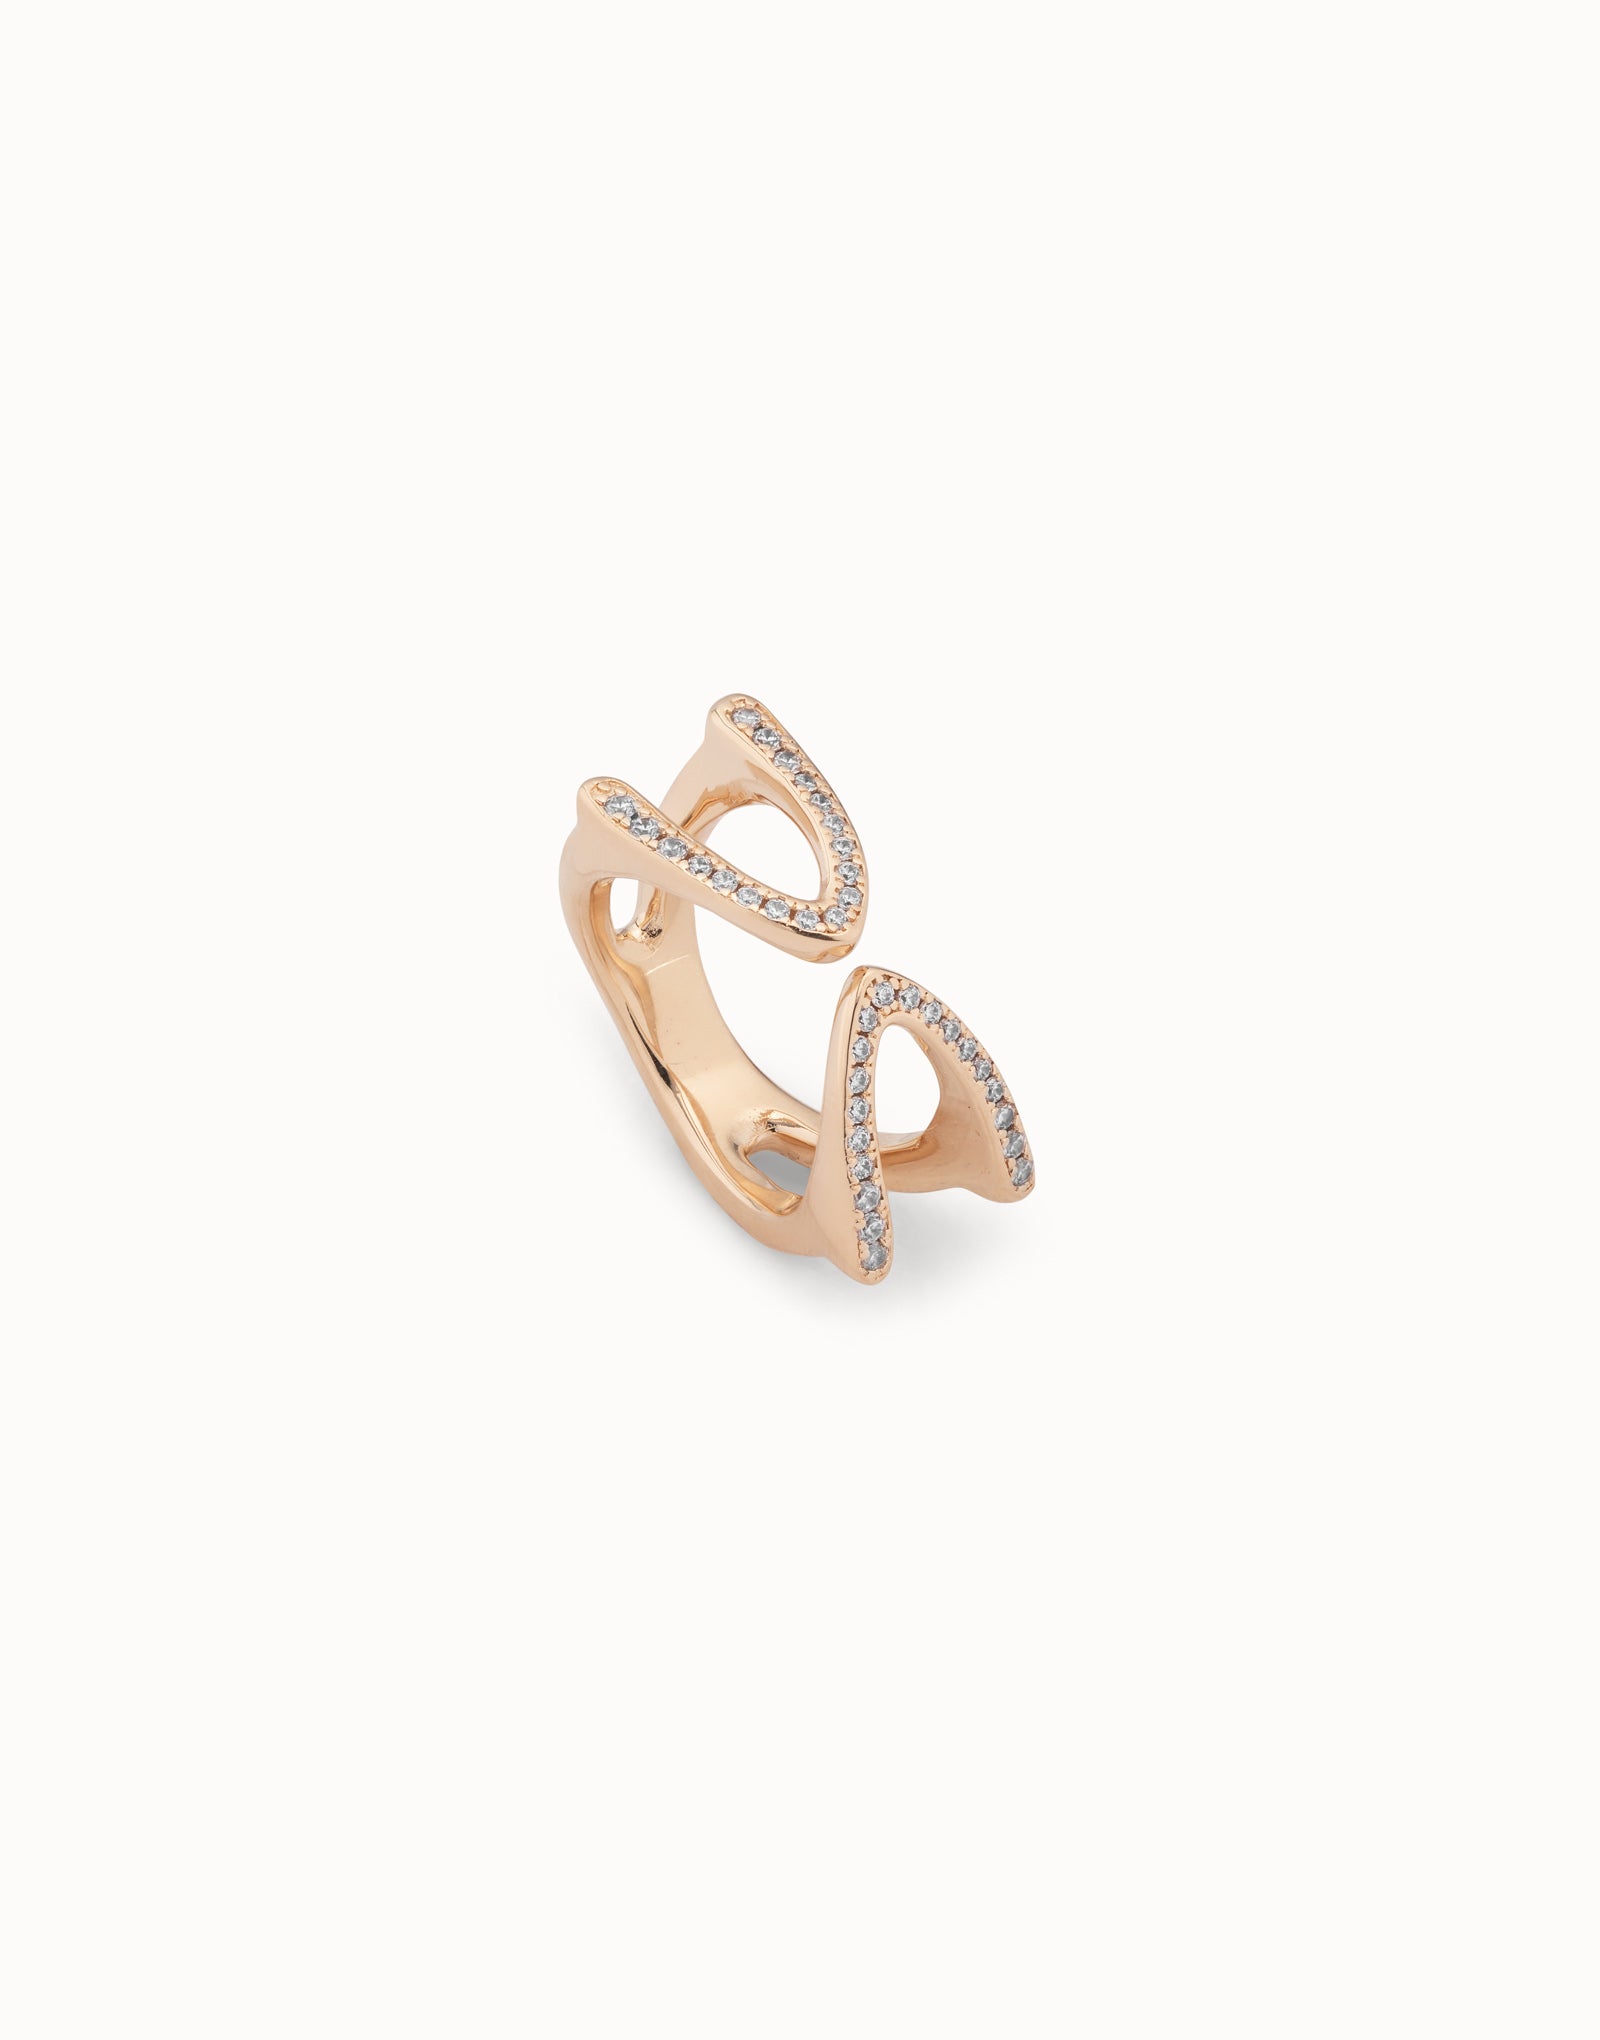 Stand out topaz ring | Uno de 50 | Luby 